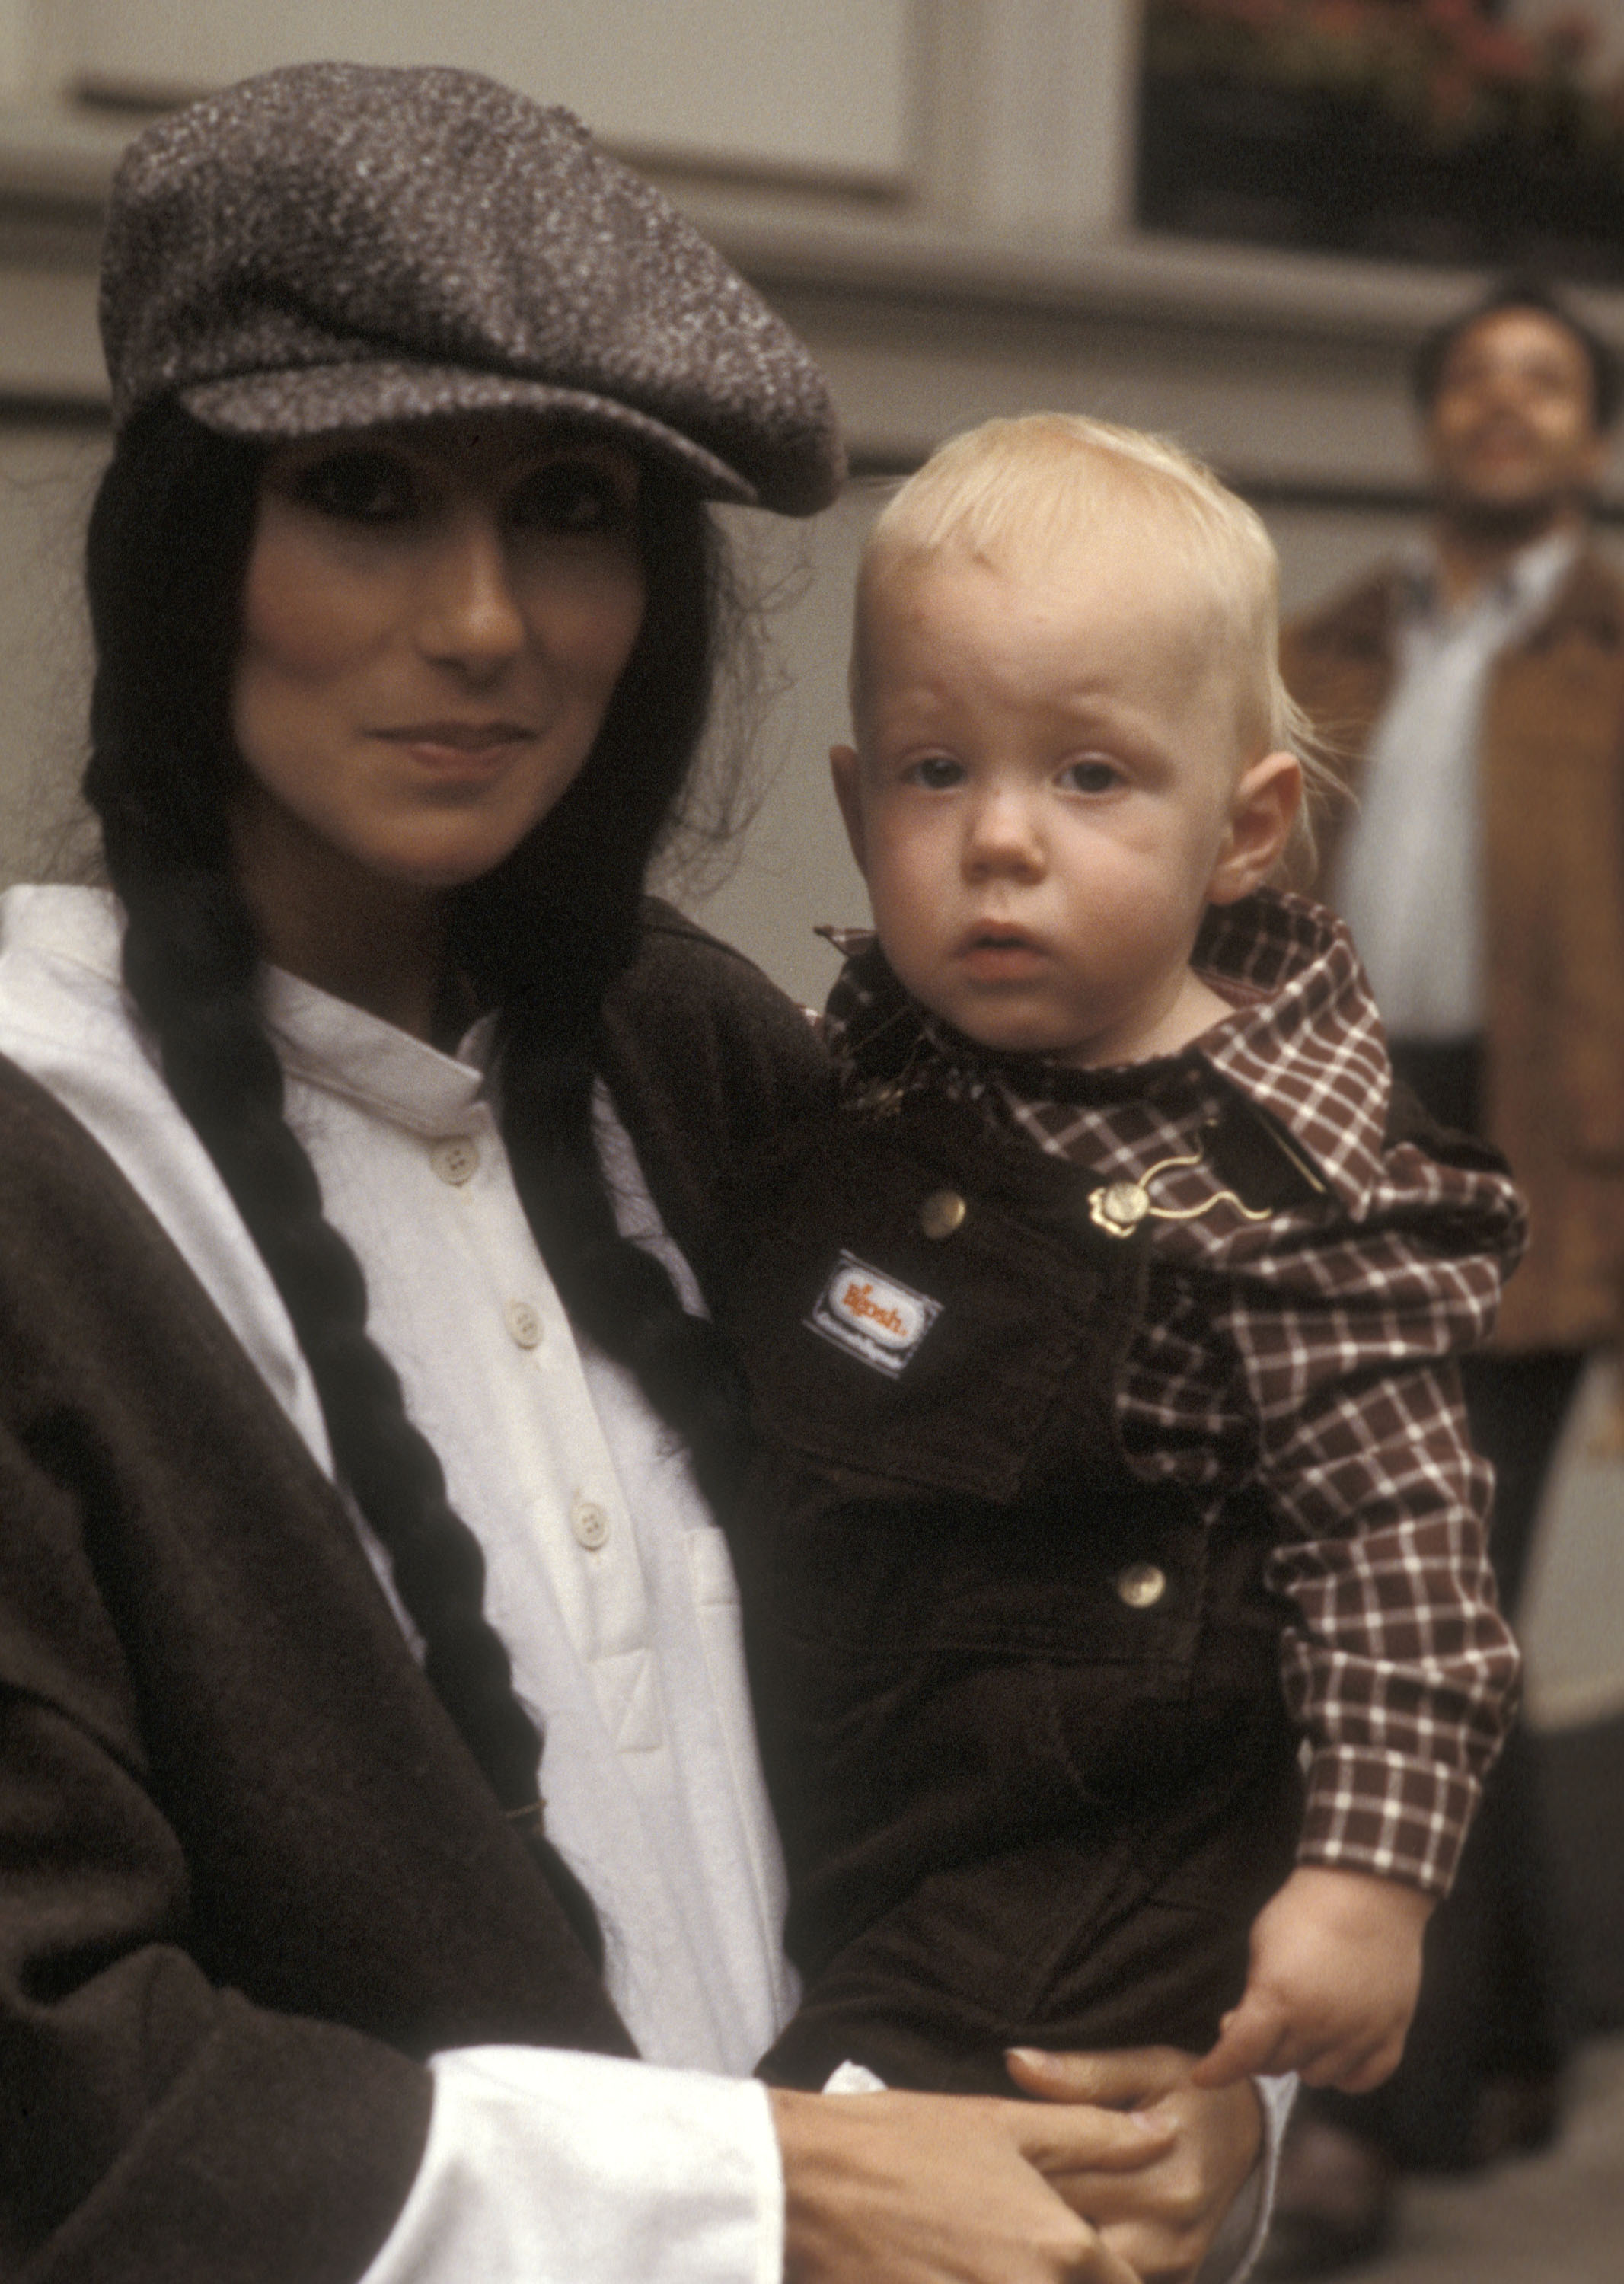 Cher and her son Elijah Blue Allman on September 23, 1977 in New York City | Source: Getty Images